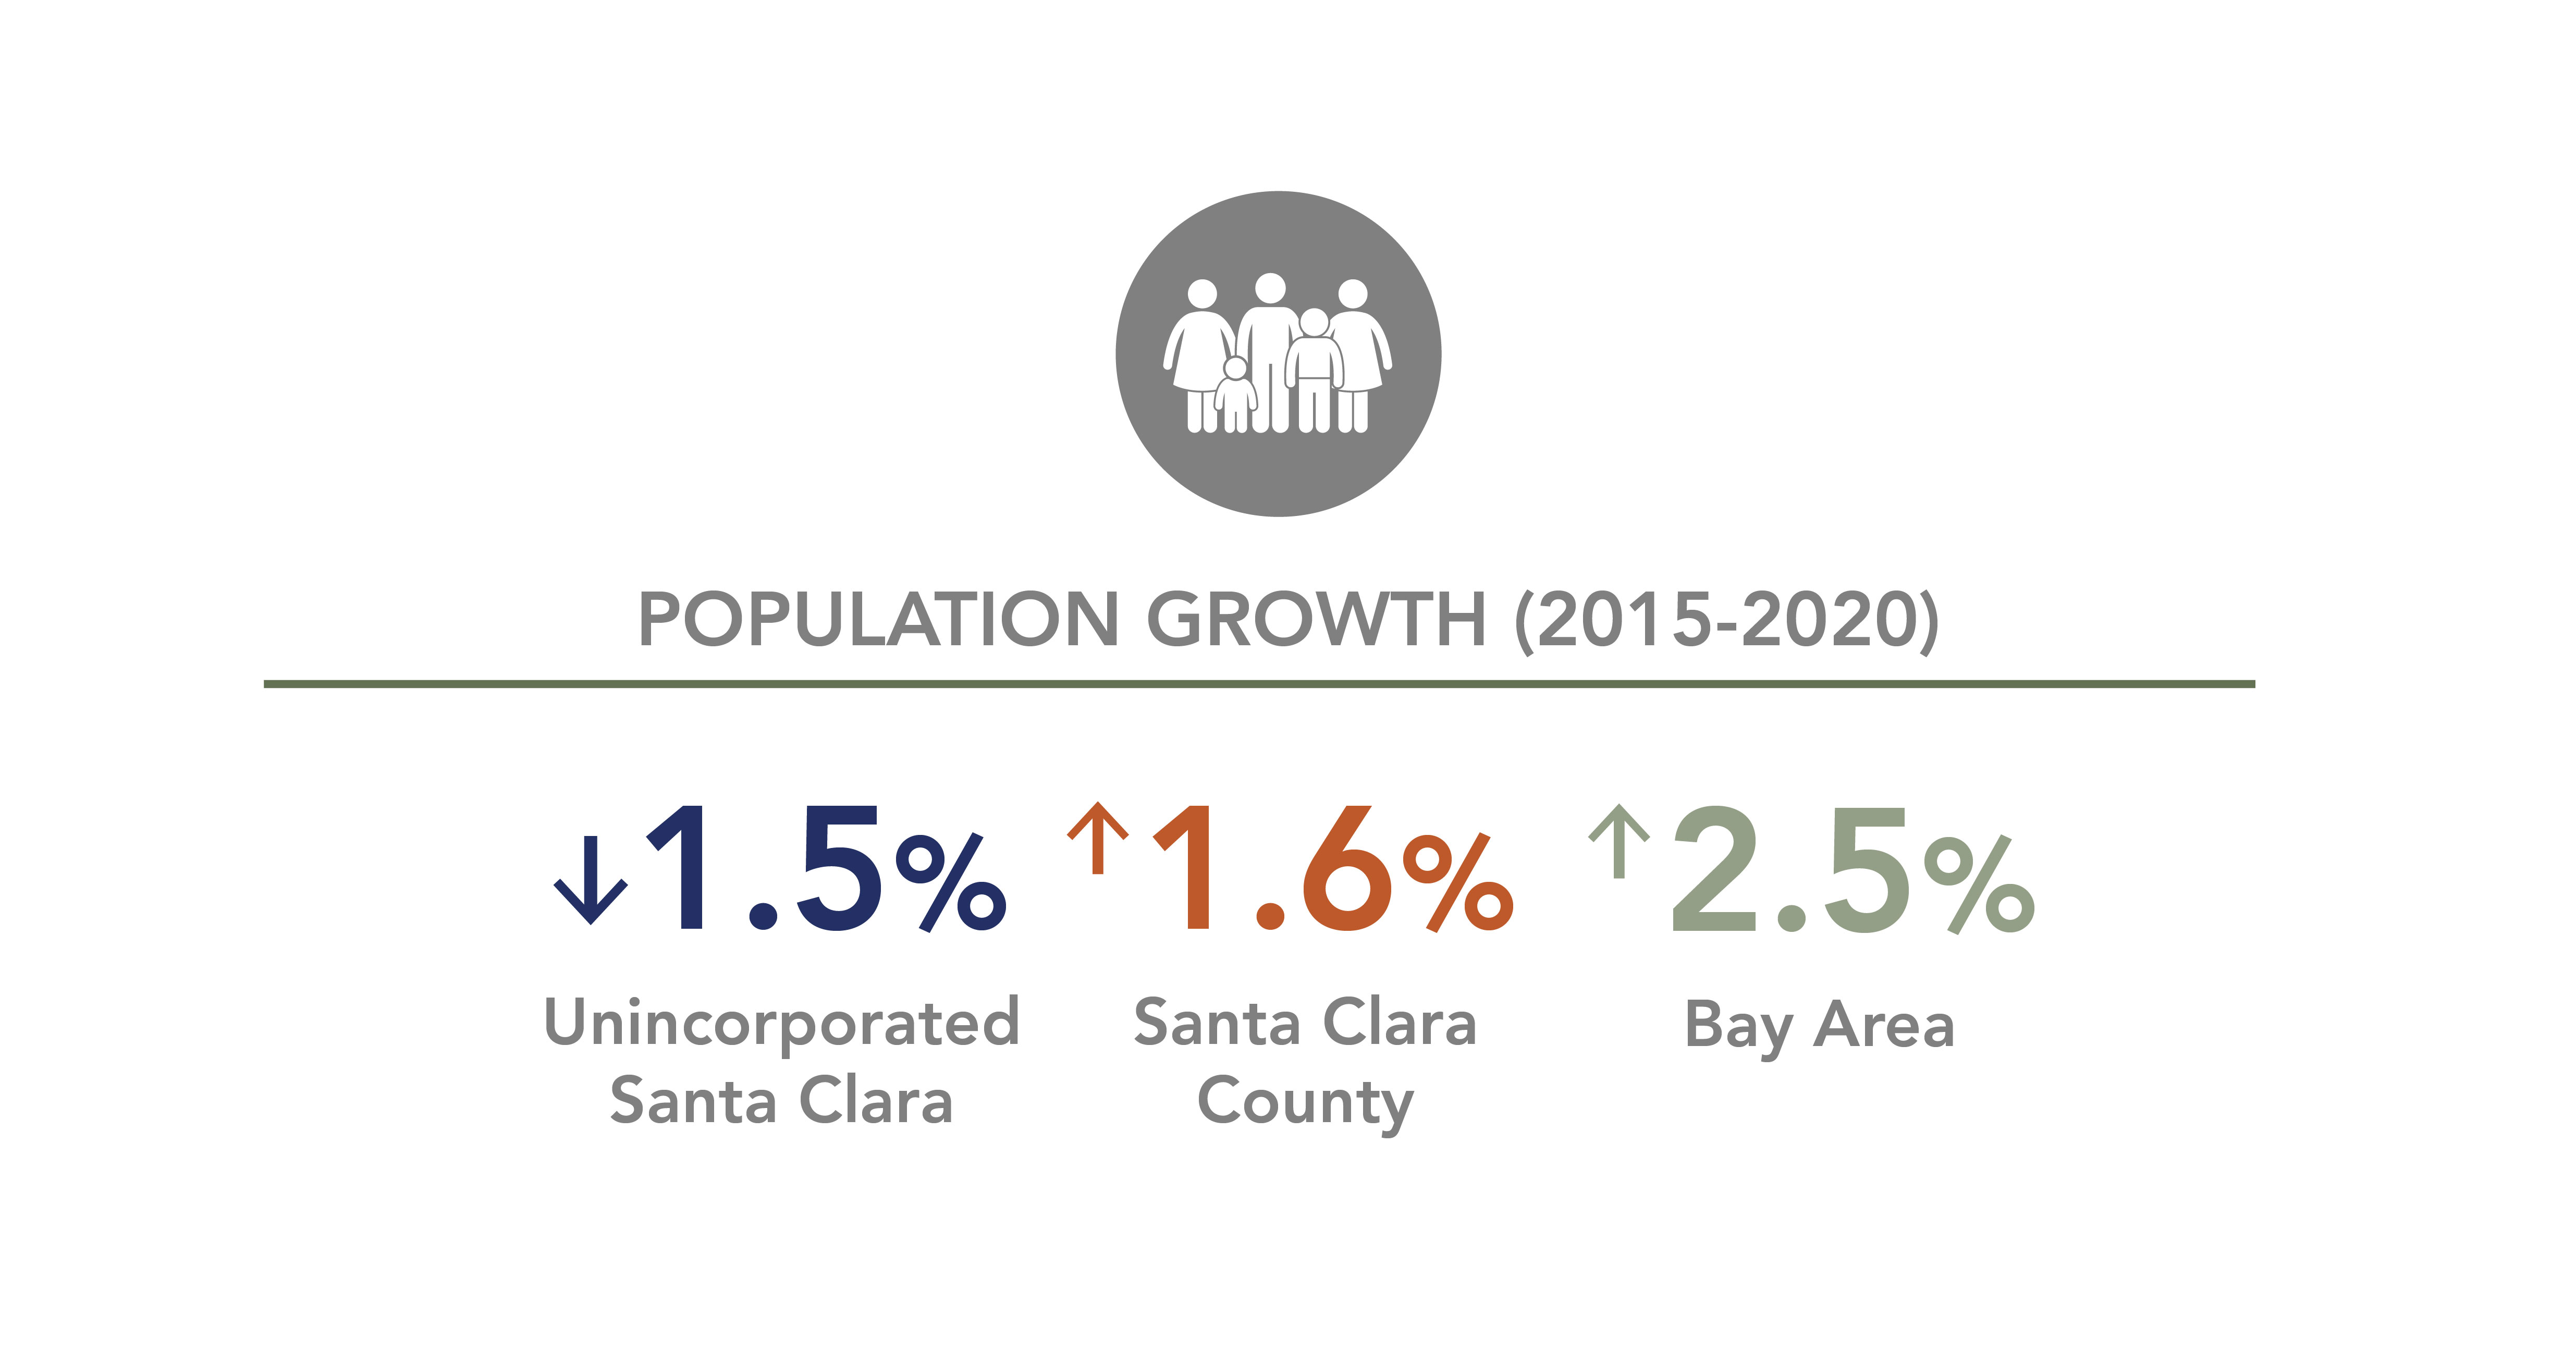 Population has decreased in Unincorporated Santa Clara by 1.5%, and increased in Santa Clara County by 1.6% and the Bay Area by 2.5%